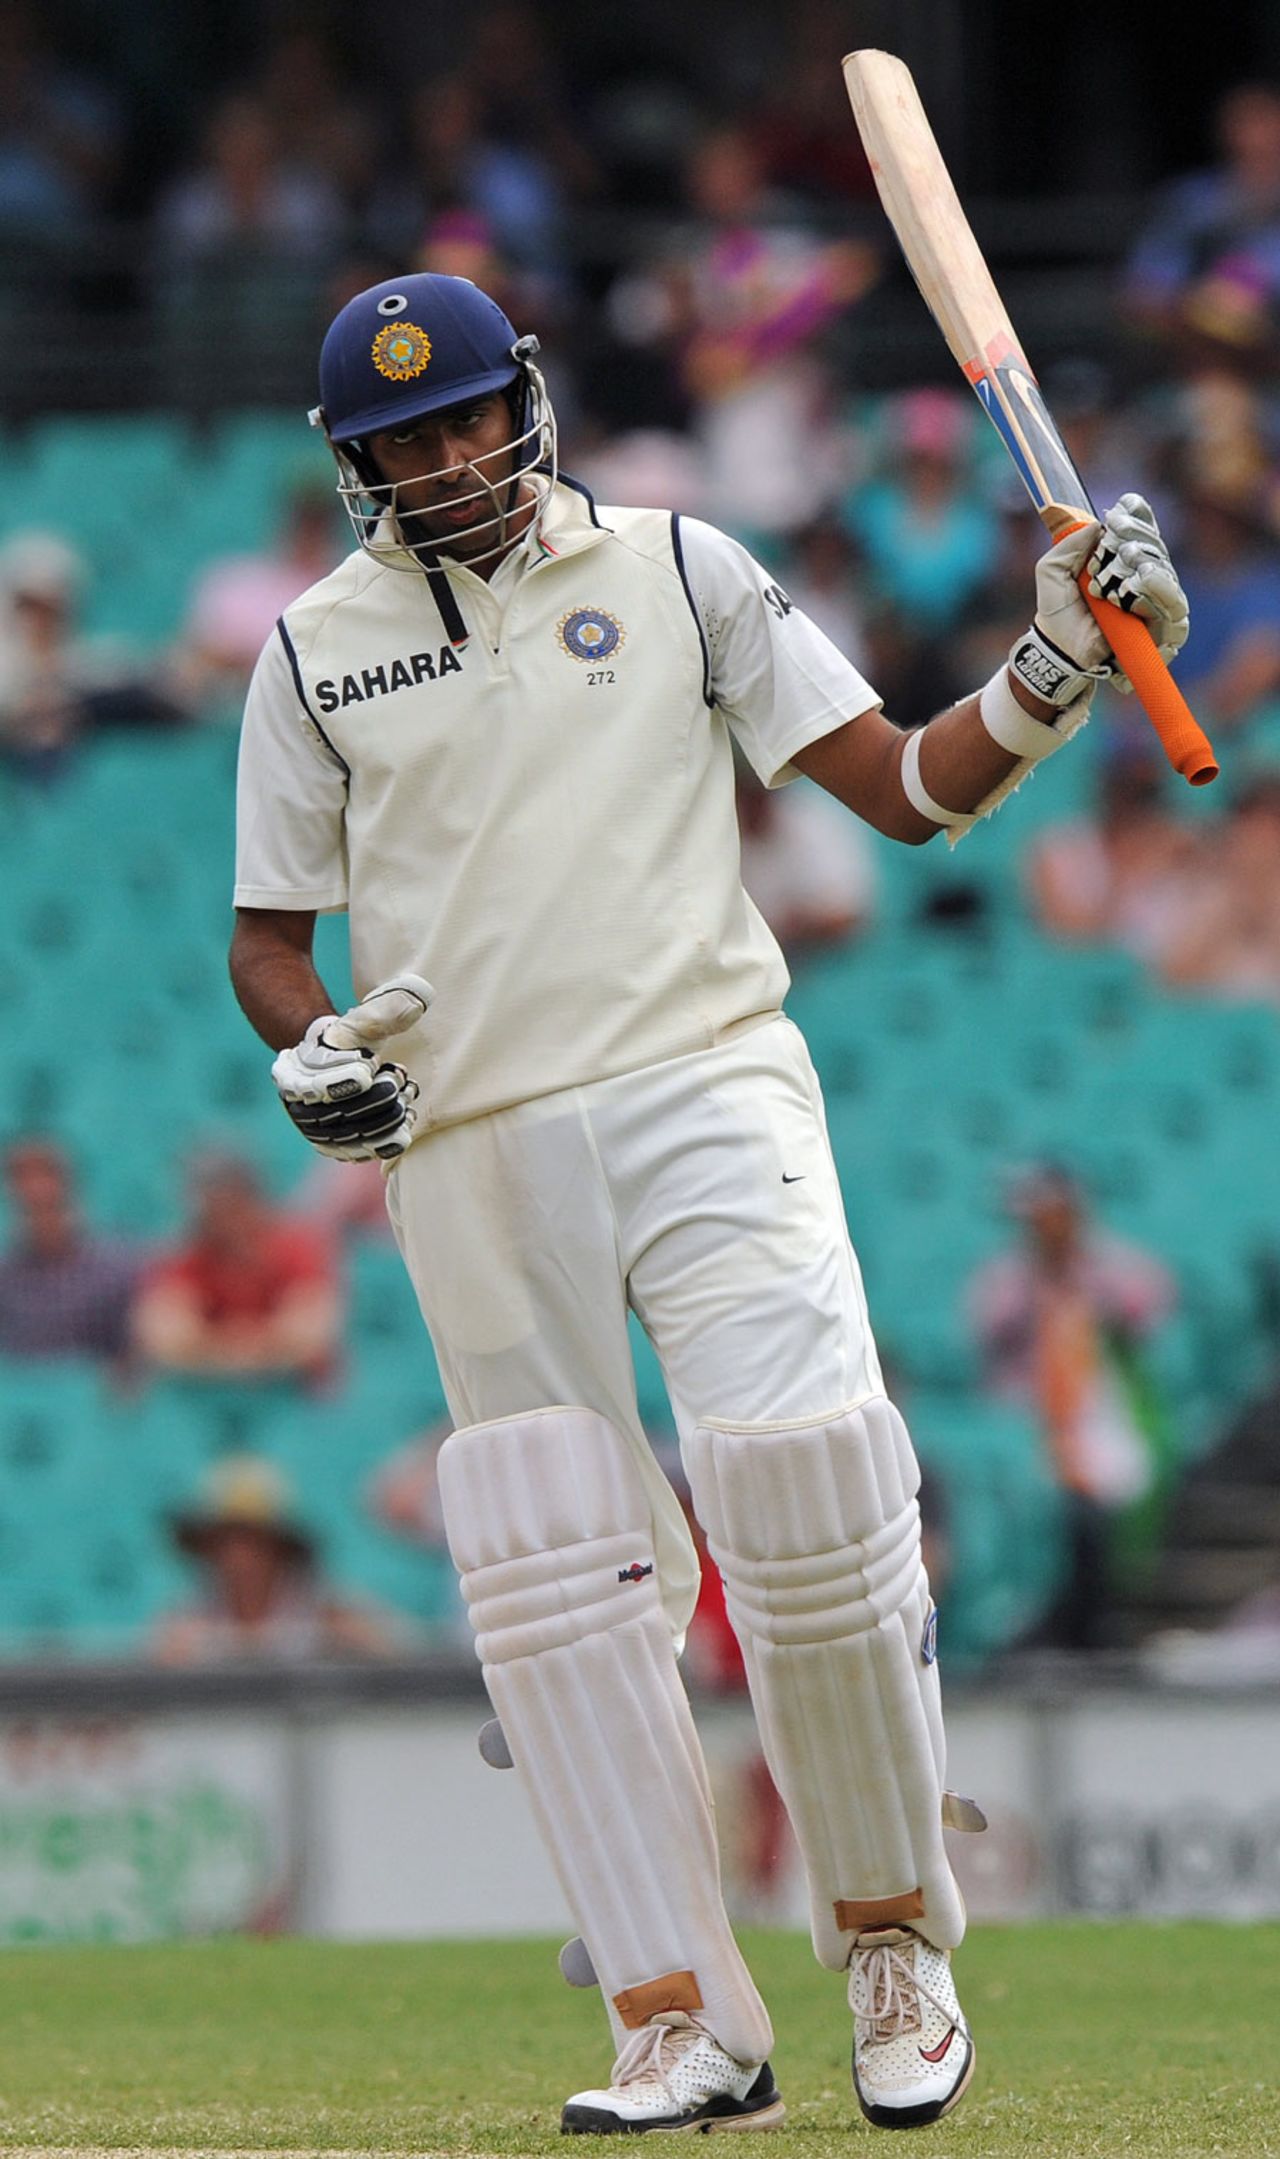 R Ashwin made a brisk 62 down the order, Australia v India, 2nd Test, Sydney, 4th day, January 6, 2012